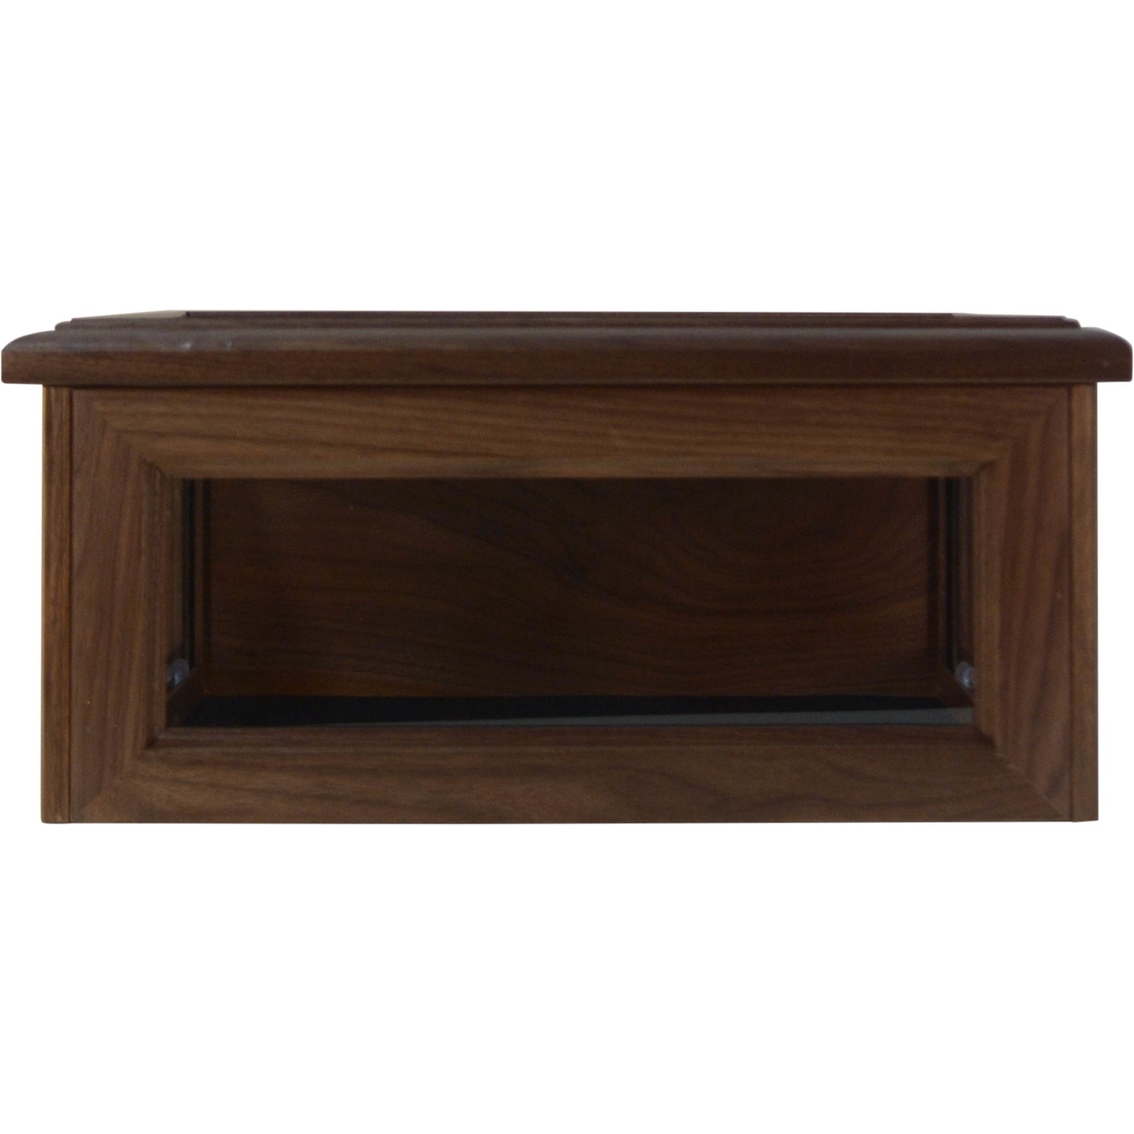 DomEx Hardwoods Hat/Cover Box, Glass Top, Walnut - Image 2 of 3